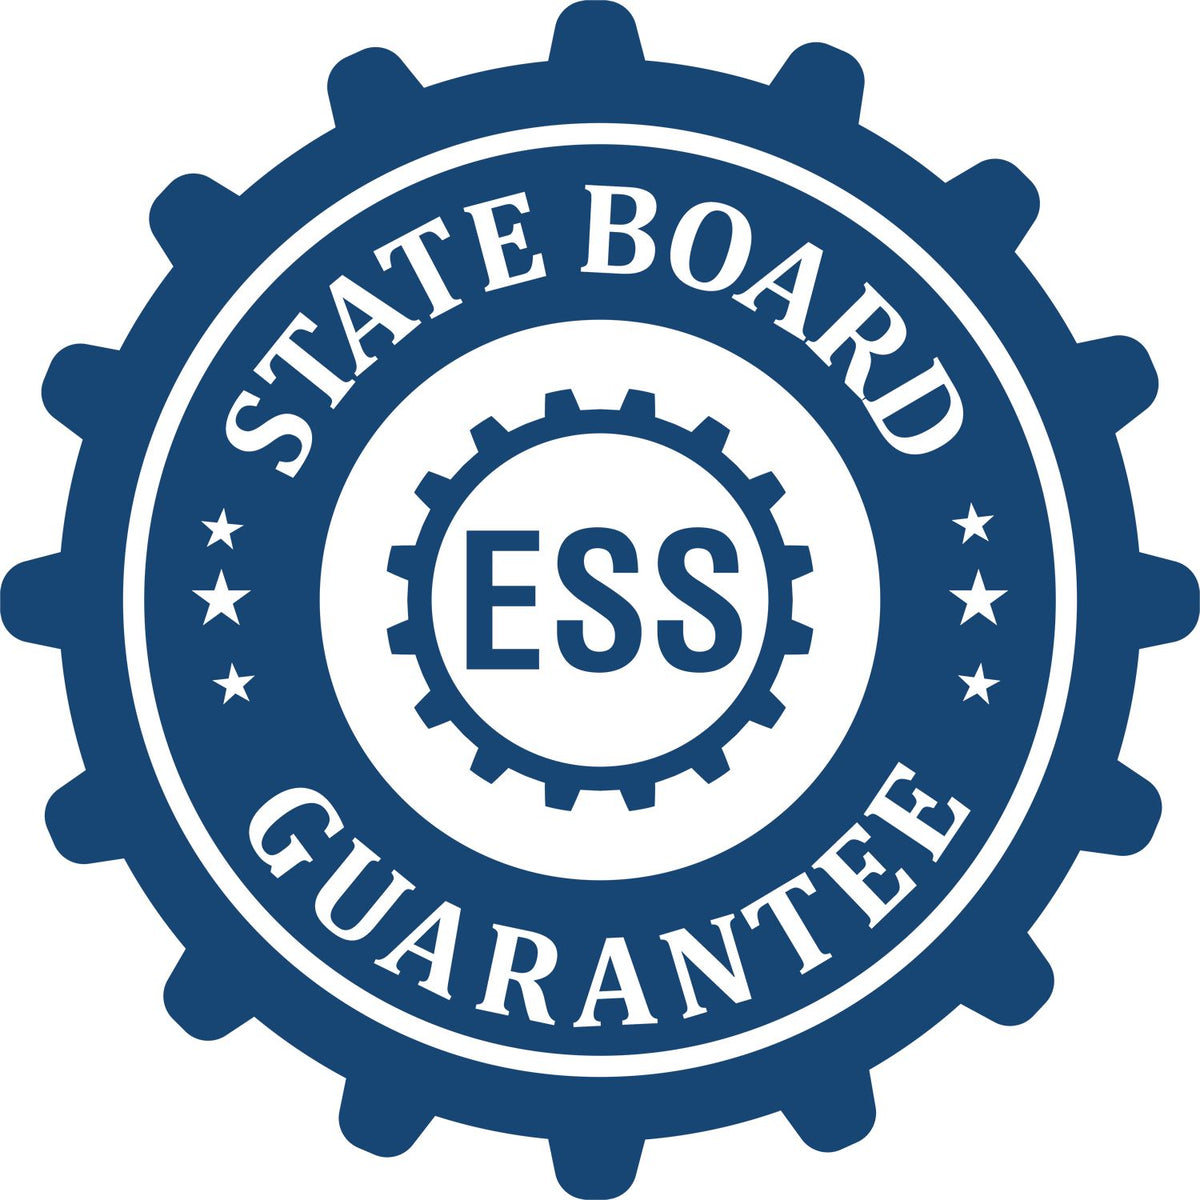 An emblem in a gear shape illustrating a state board guarantee for the Handheld Arizona Professional Geologist Embosser